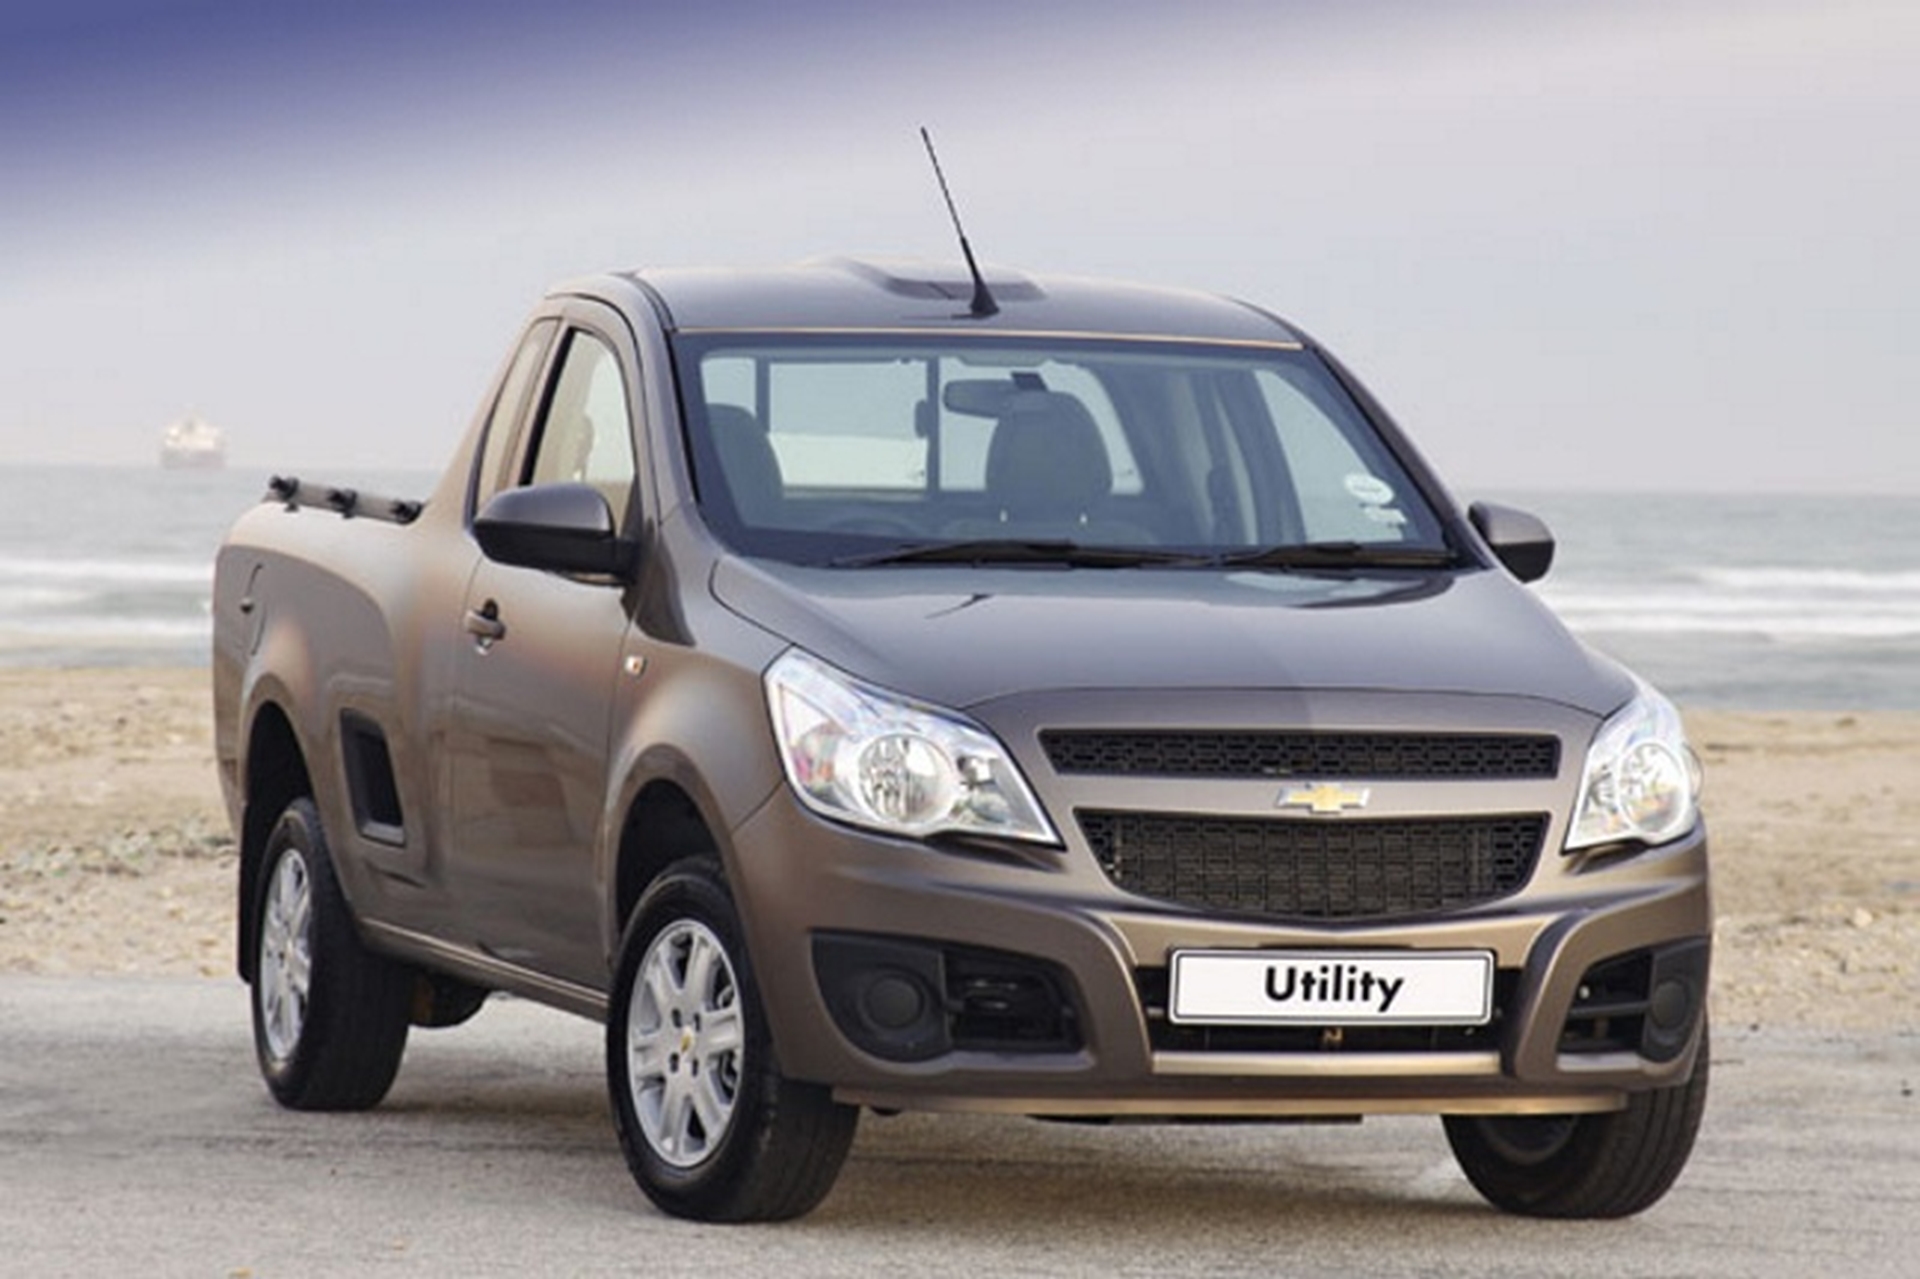 New Chevrolet Utility built to exacting Quality standards